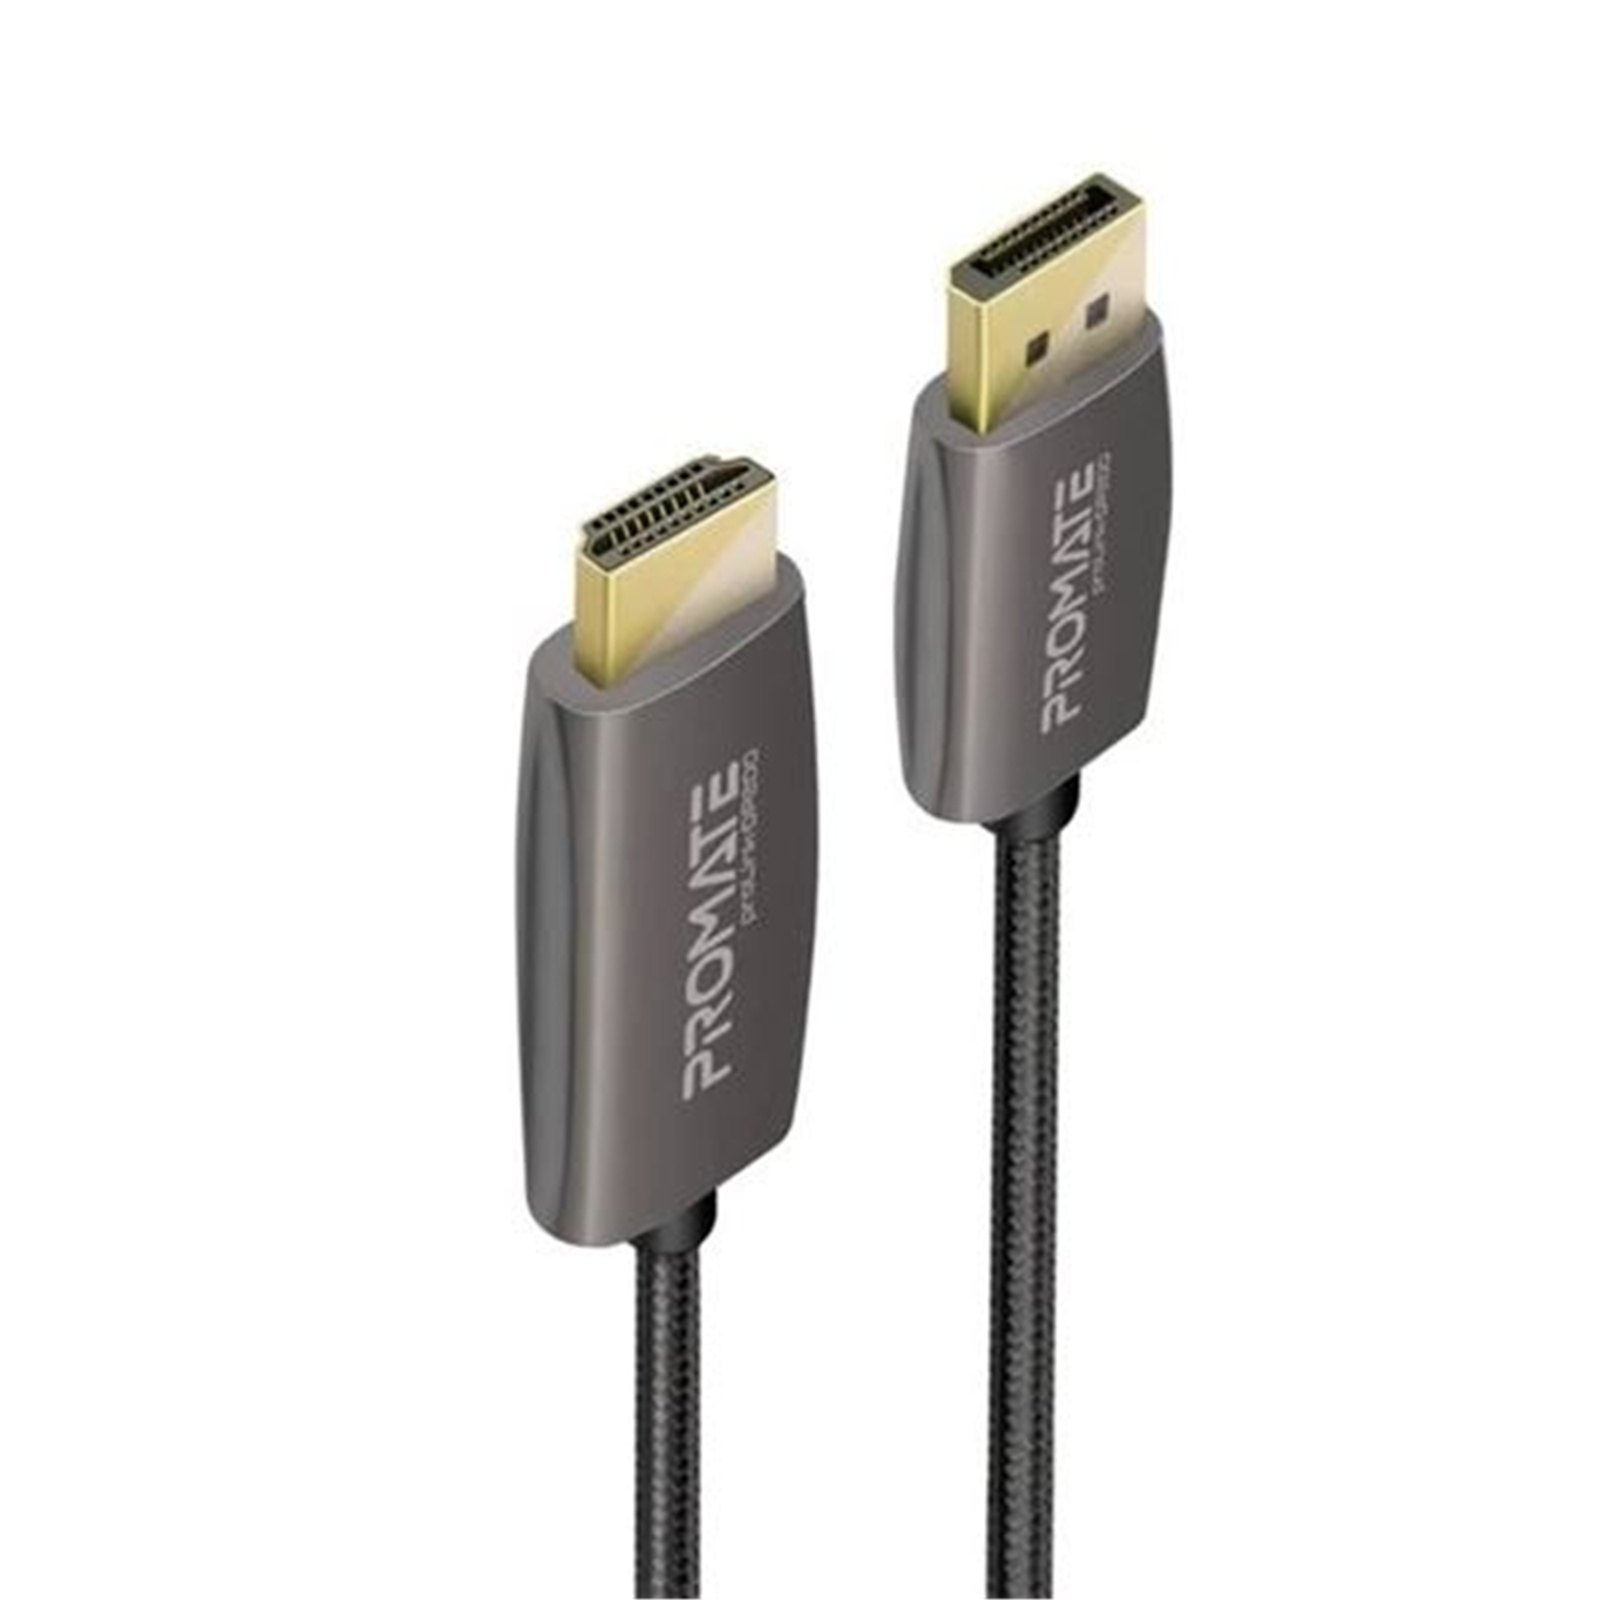 Buy the Promate PROLINK-DP200 PROMATE 2m DisplayPort to HDMI Cable. Max...  ( PROLINK-DP200 ) online - PBTech.com